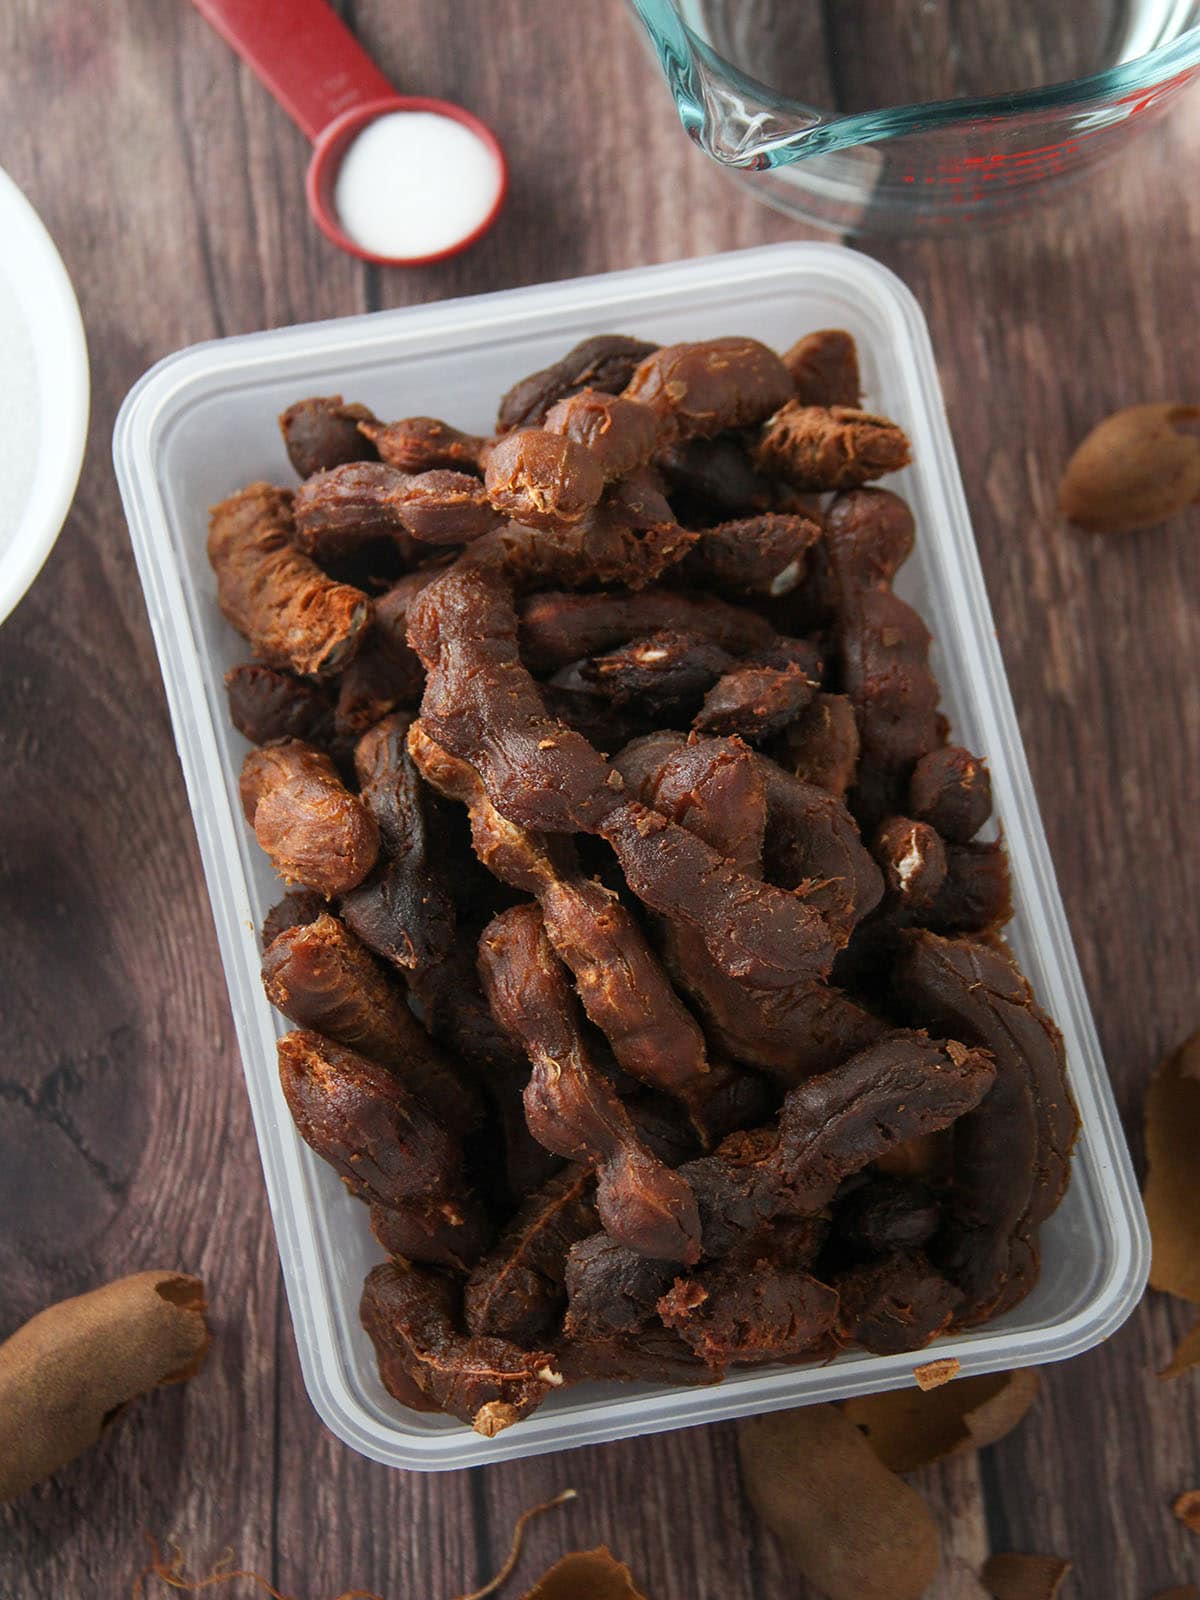 peeled tamarind pods in a plastic container